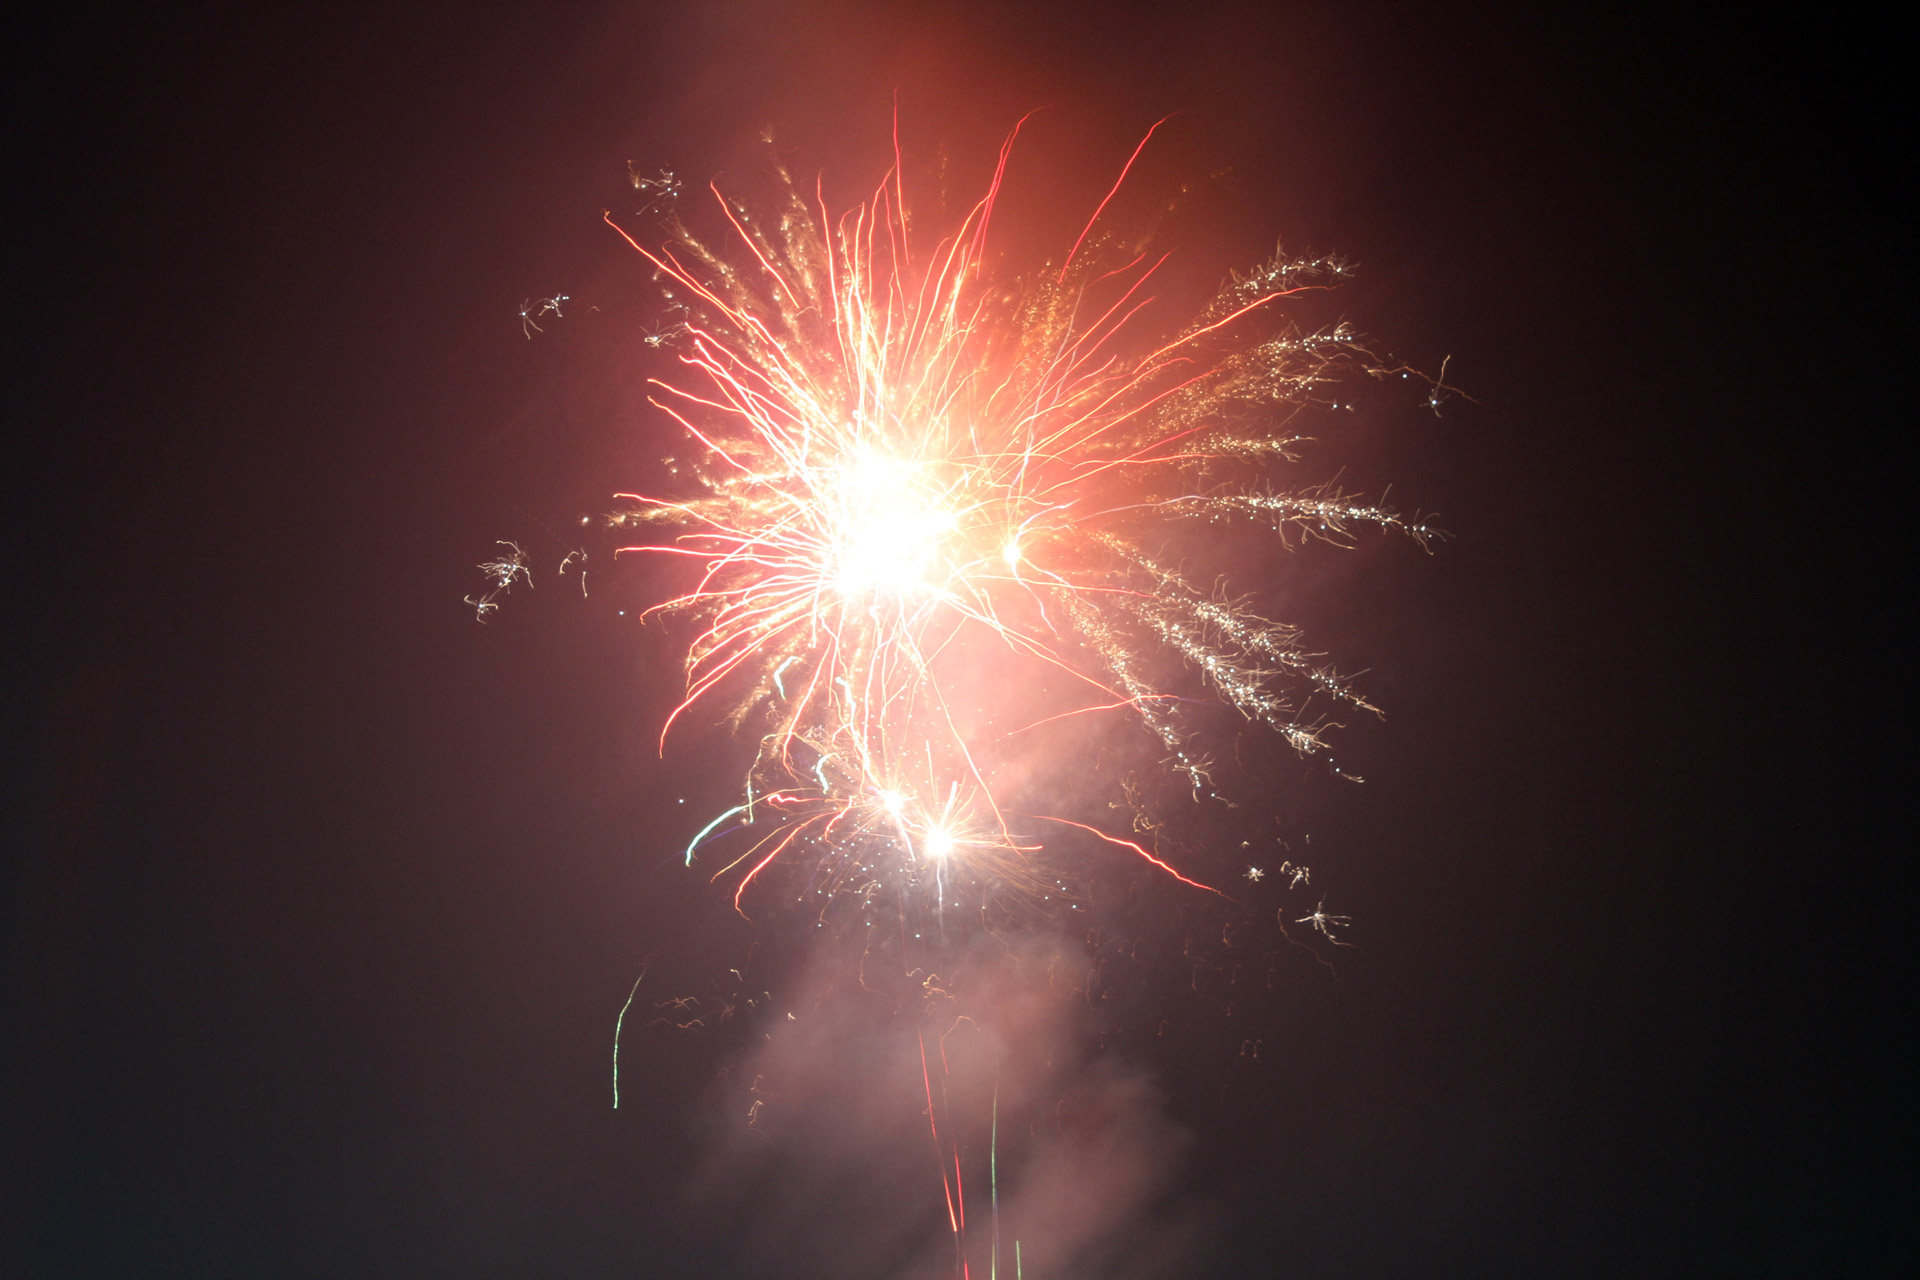 fireworks-sparks-object-holiday-new-year-s-eve-free-image-from